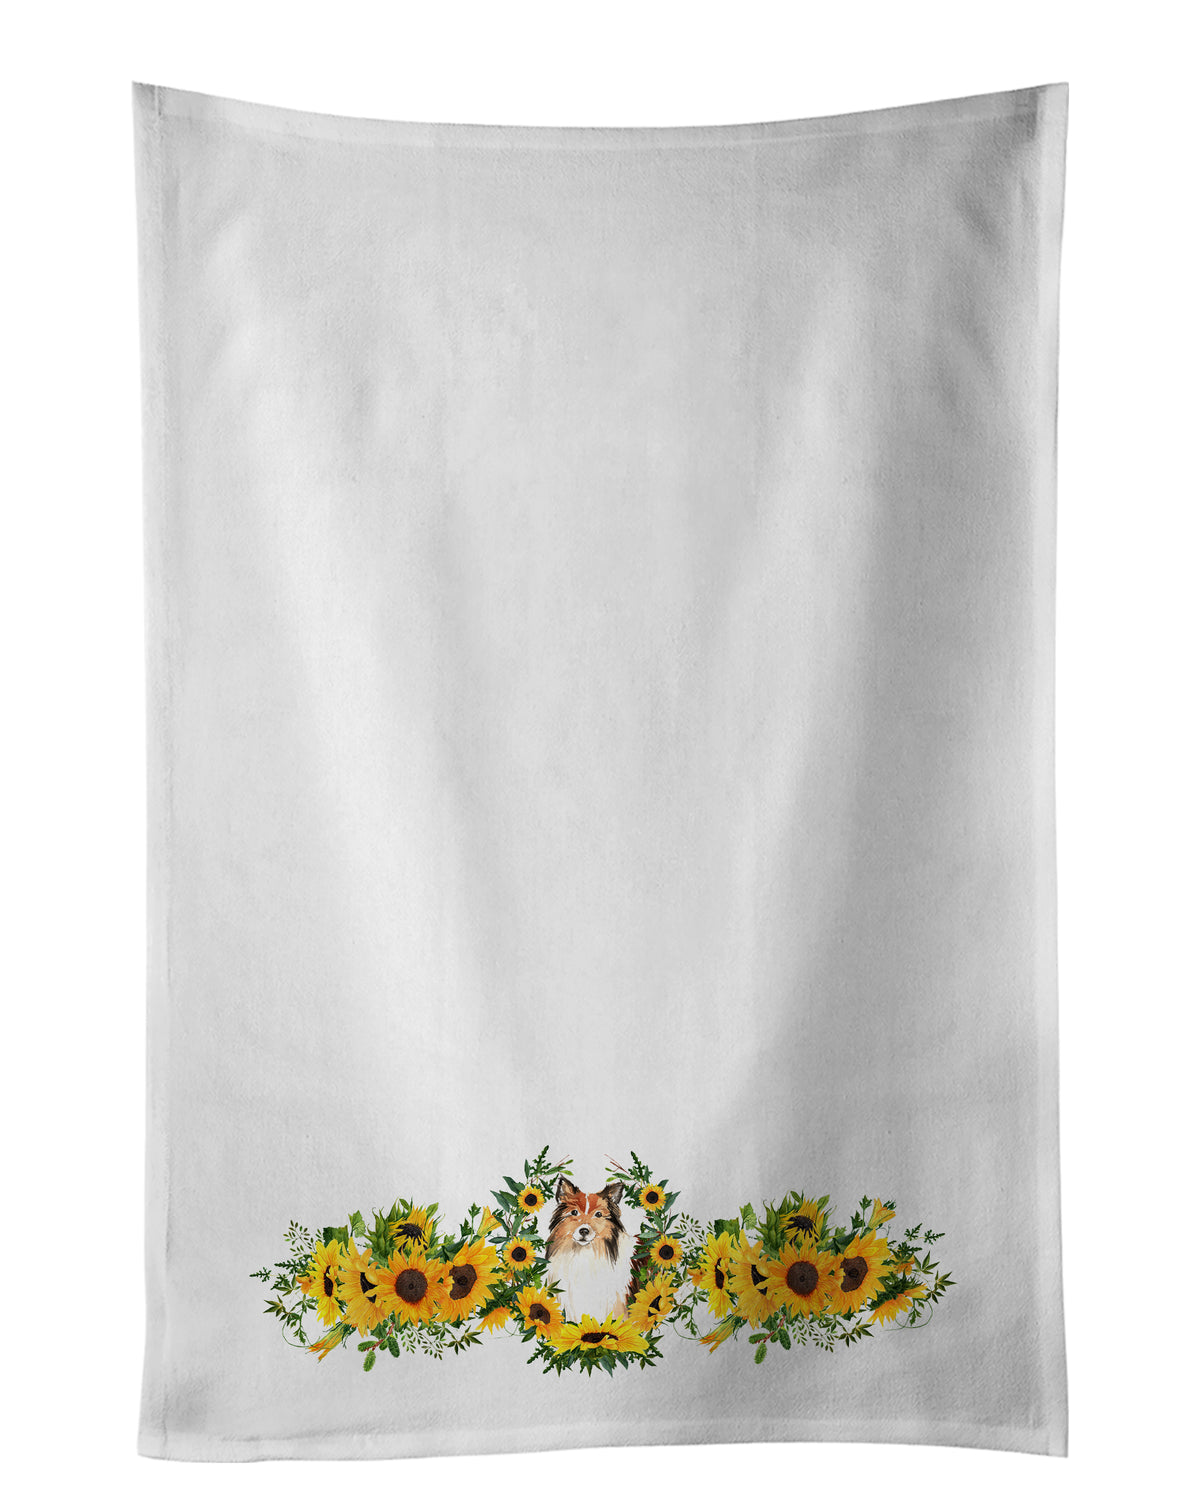 Buy this Sheltie in Sunflowers White Kitchen Towel Set of 2